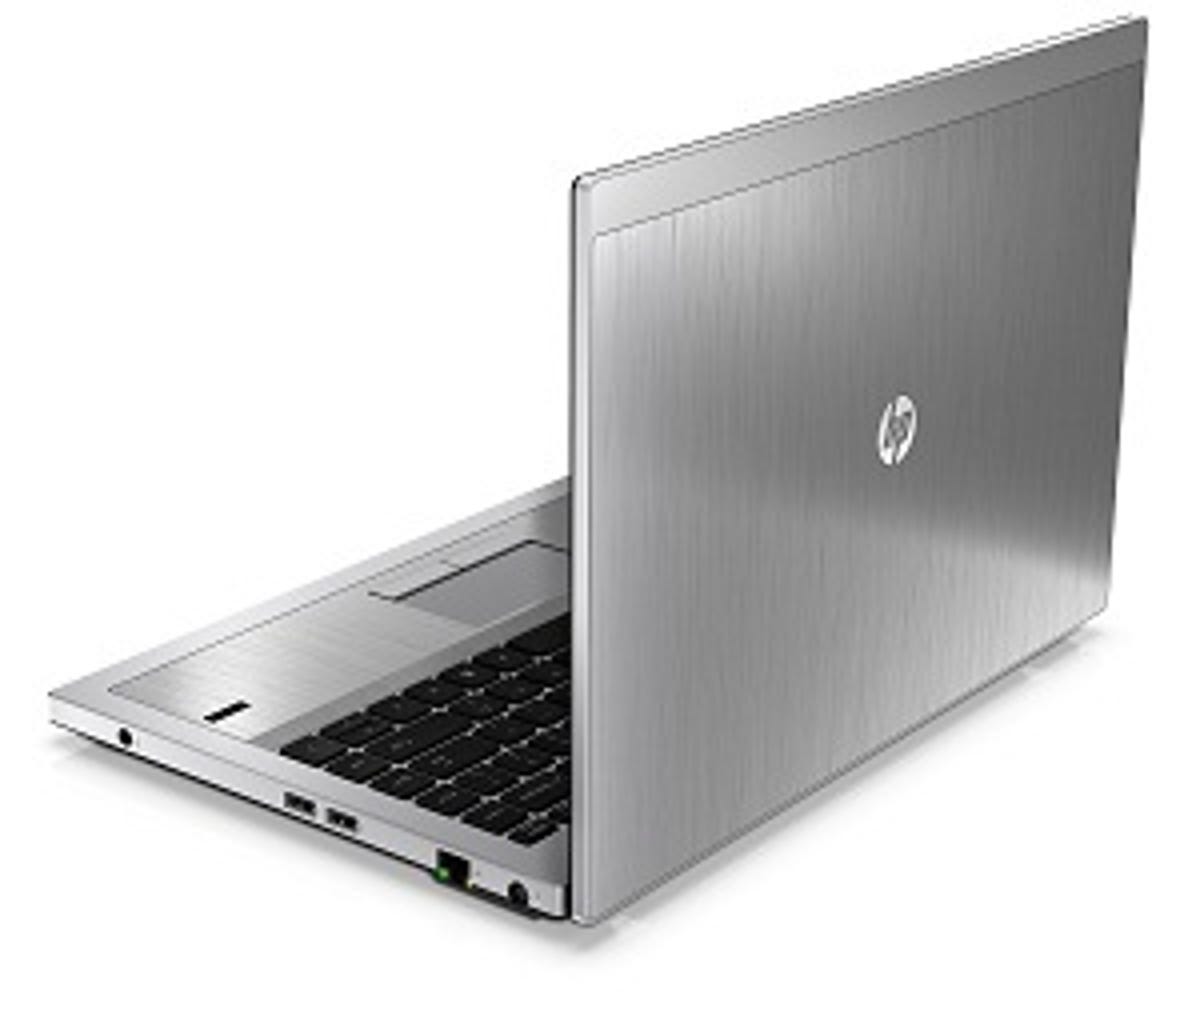 HP ProBook 5330m--one of HP's thinner business laptops.  There is pressure to keep PCs inside the company.